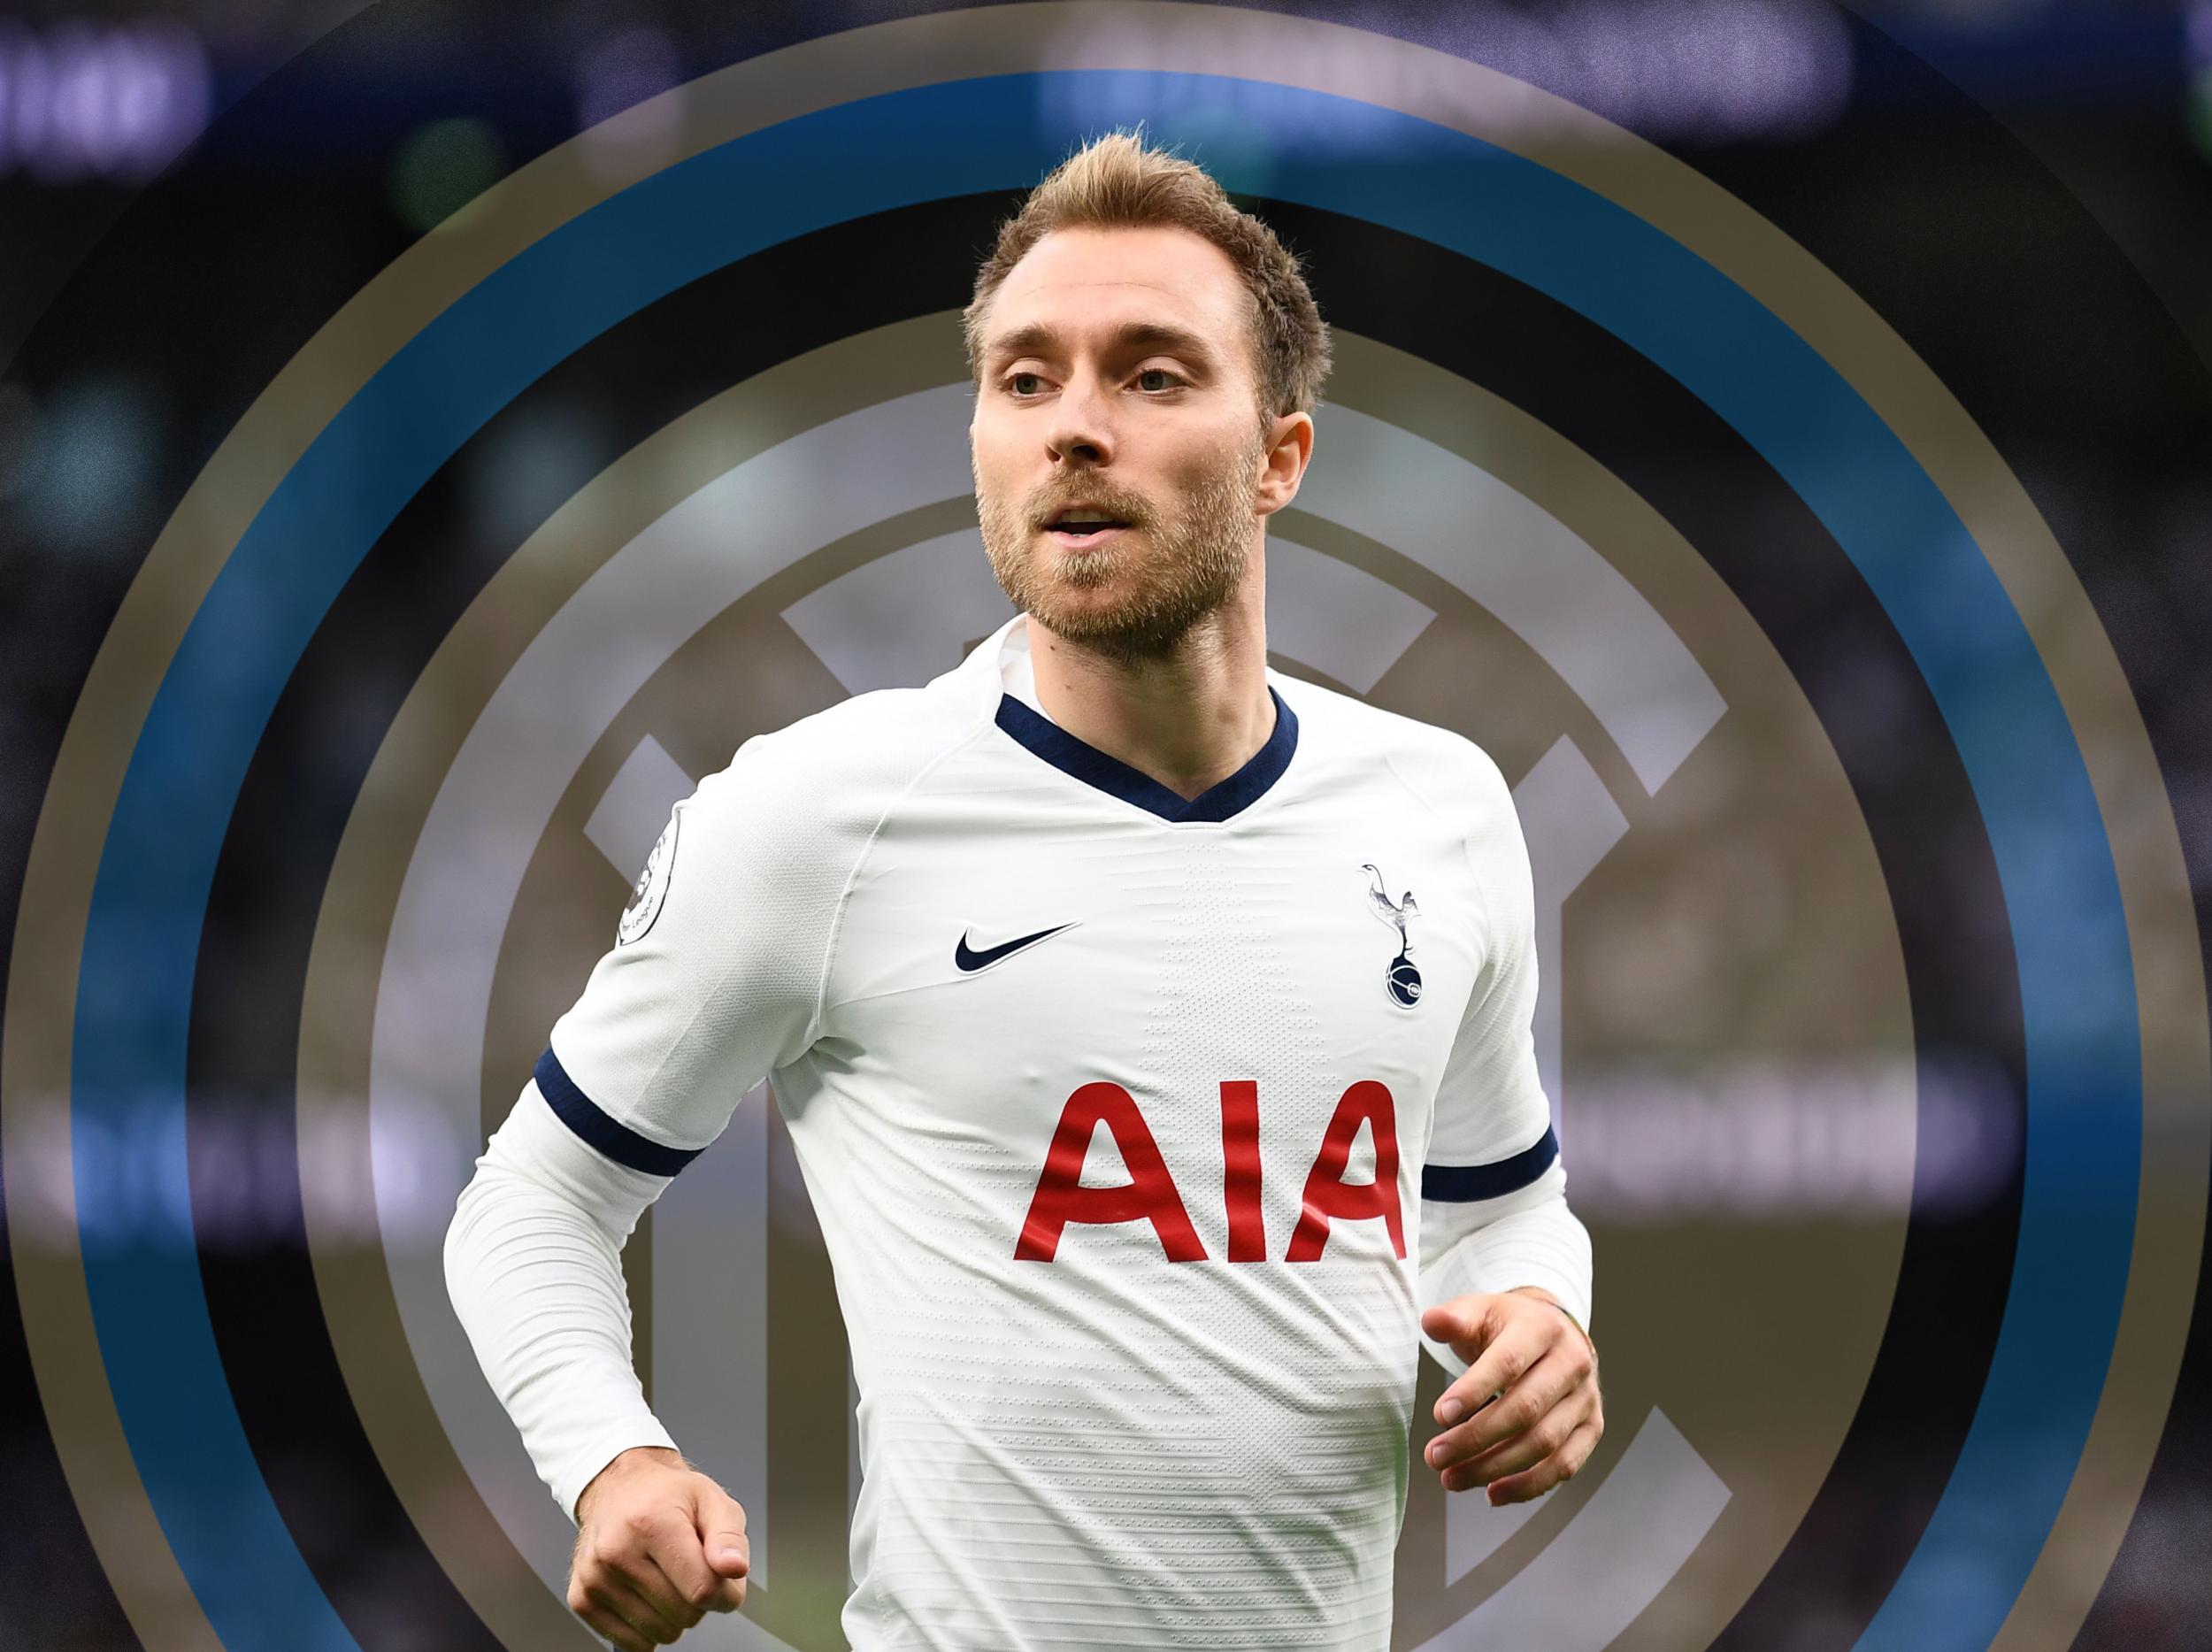 Christian Eriksen has been linked with a move to Inter Milan